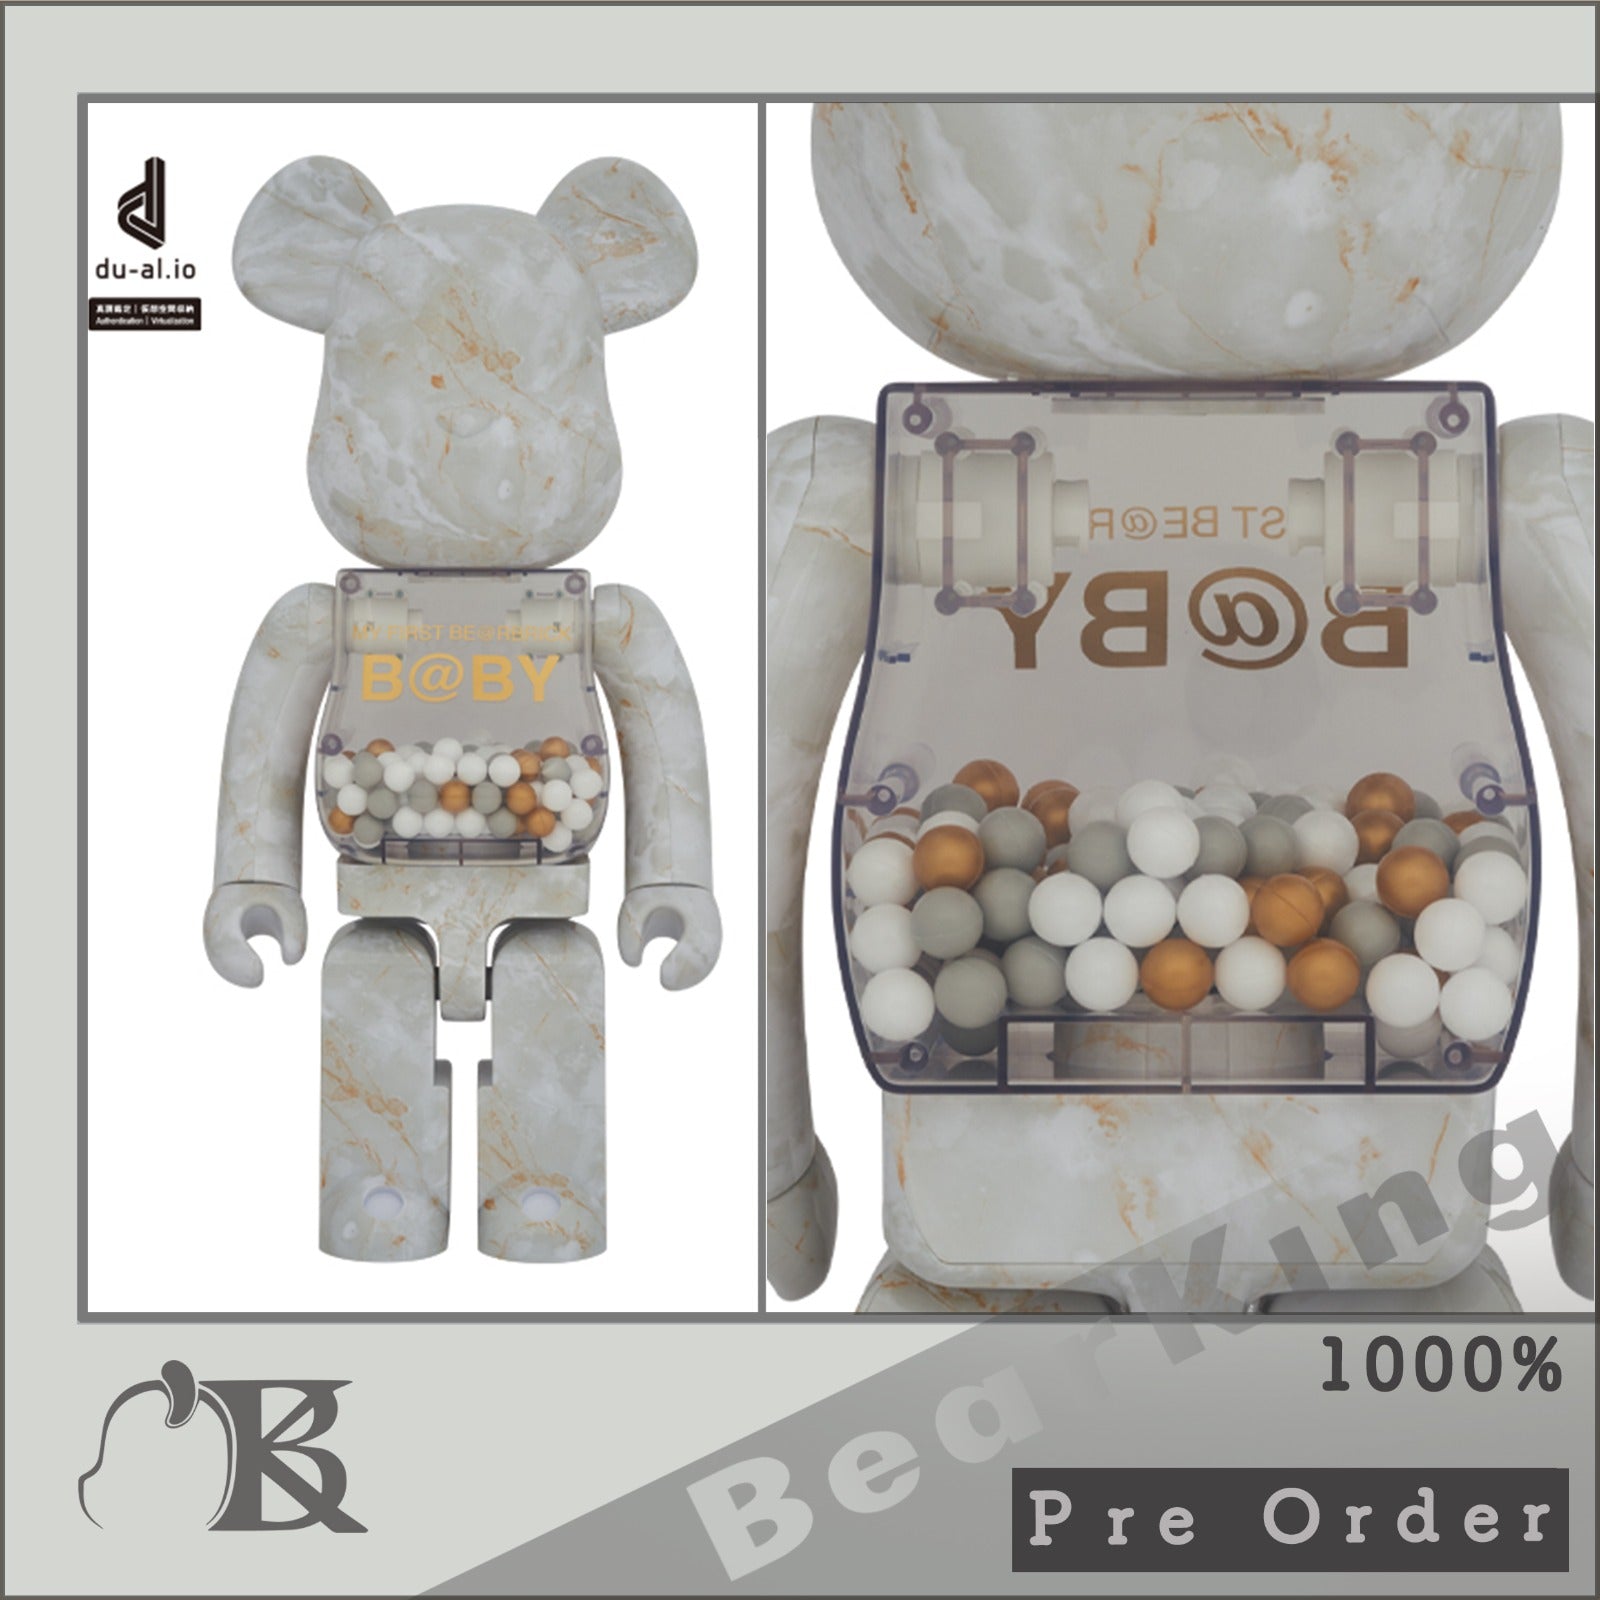 MY FIRST BE@RBRICK B@BY MARBLE Ver. 1000％ 千秋Baby 雲石